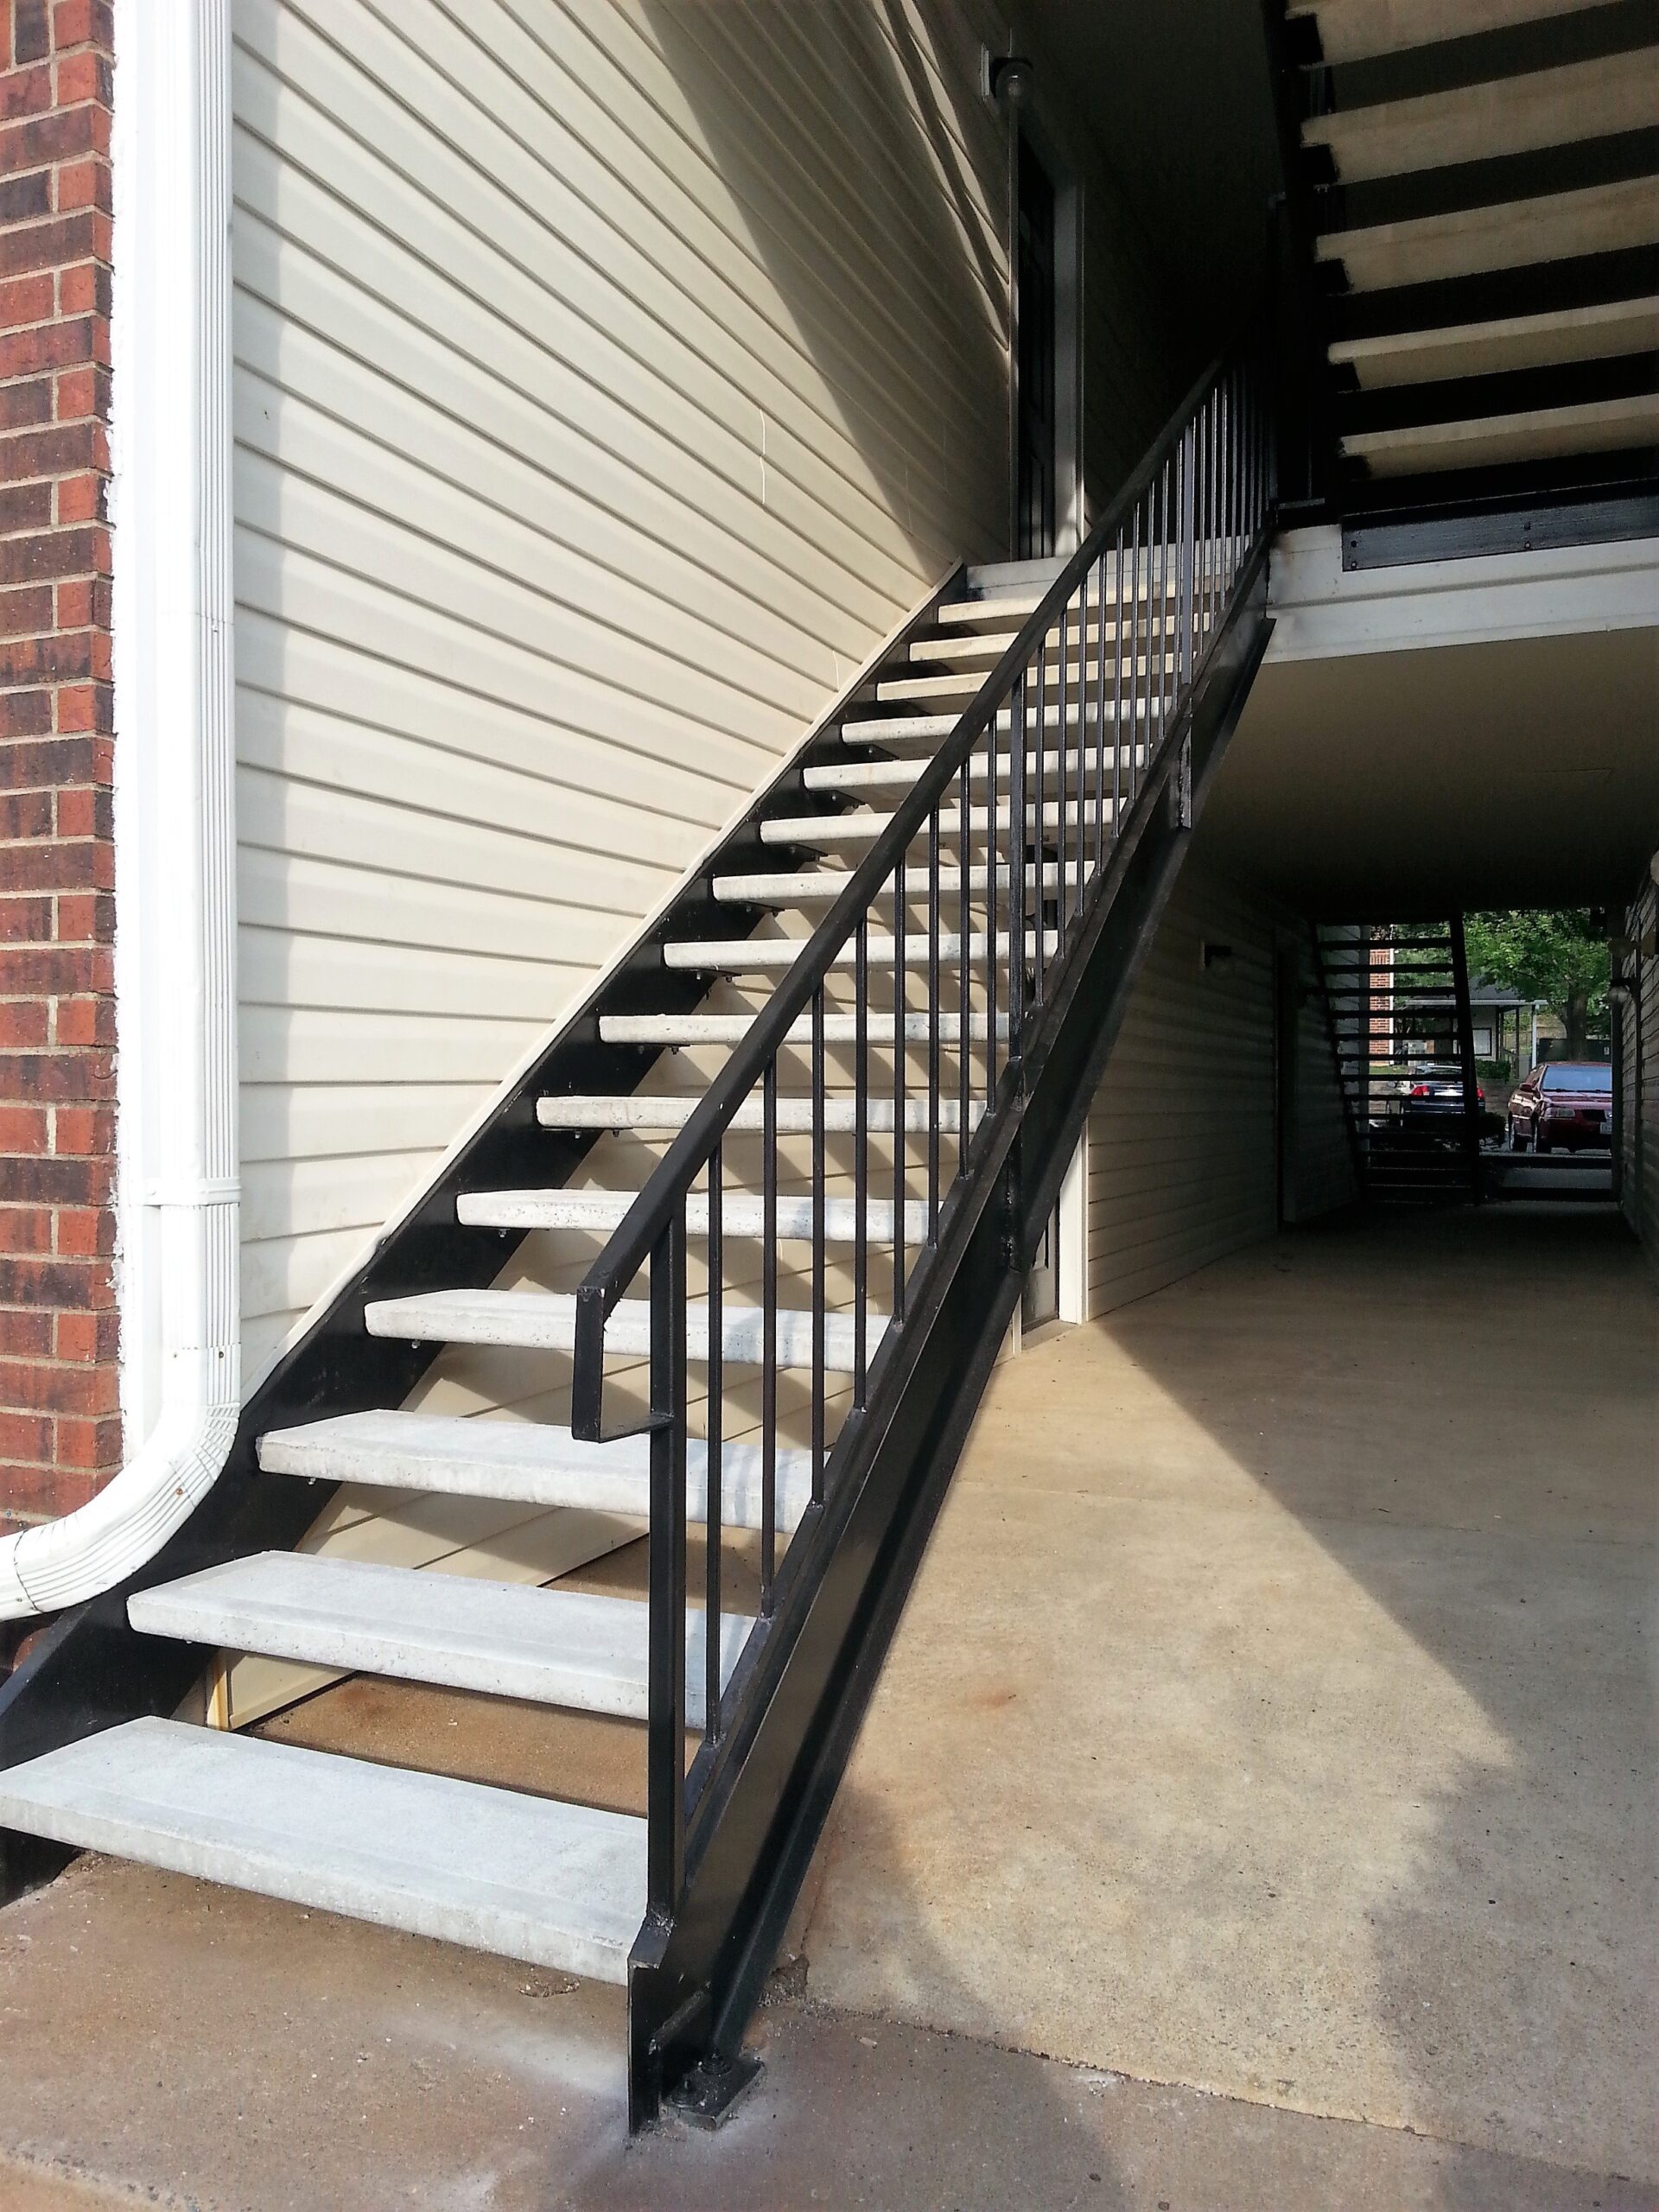 This showcases a completed loudoun stairs project within an apartment complex in northern virginia. 